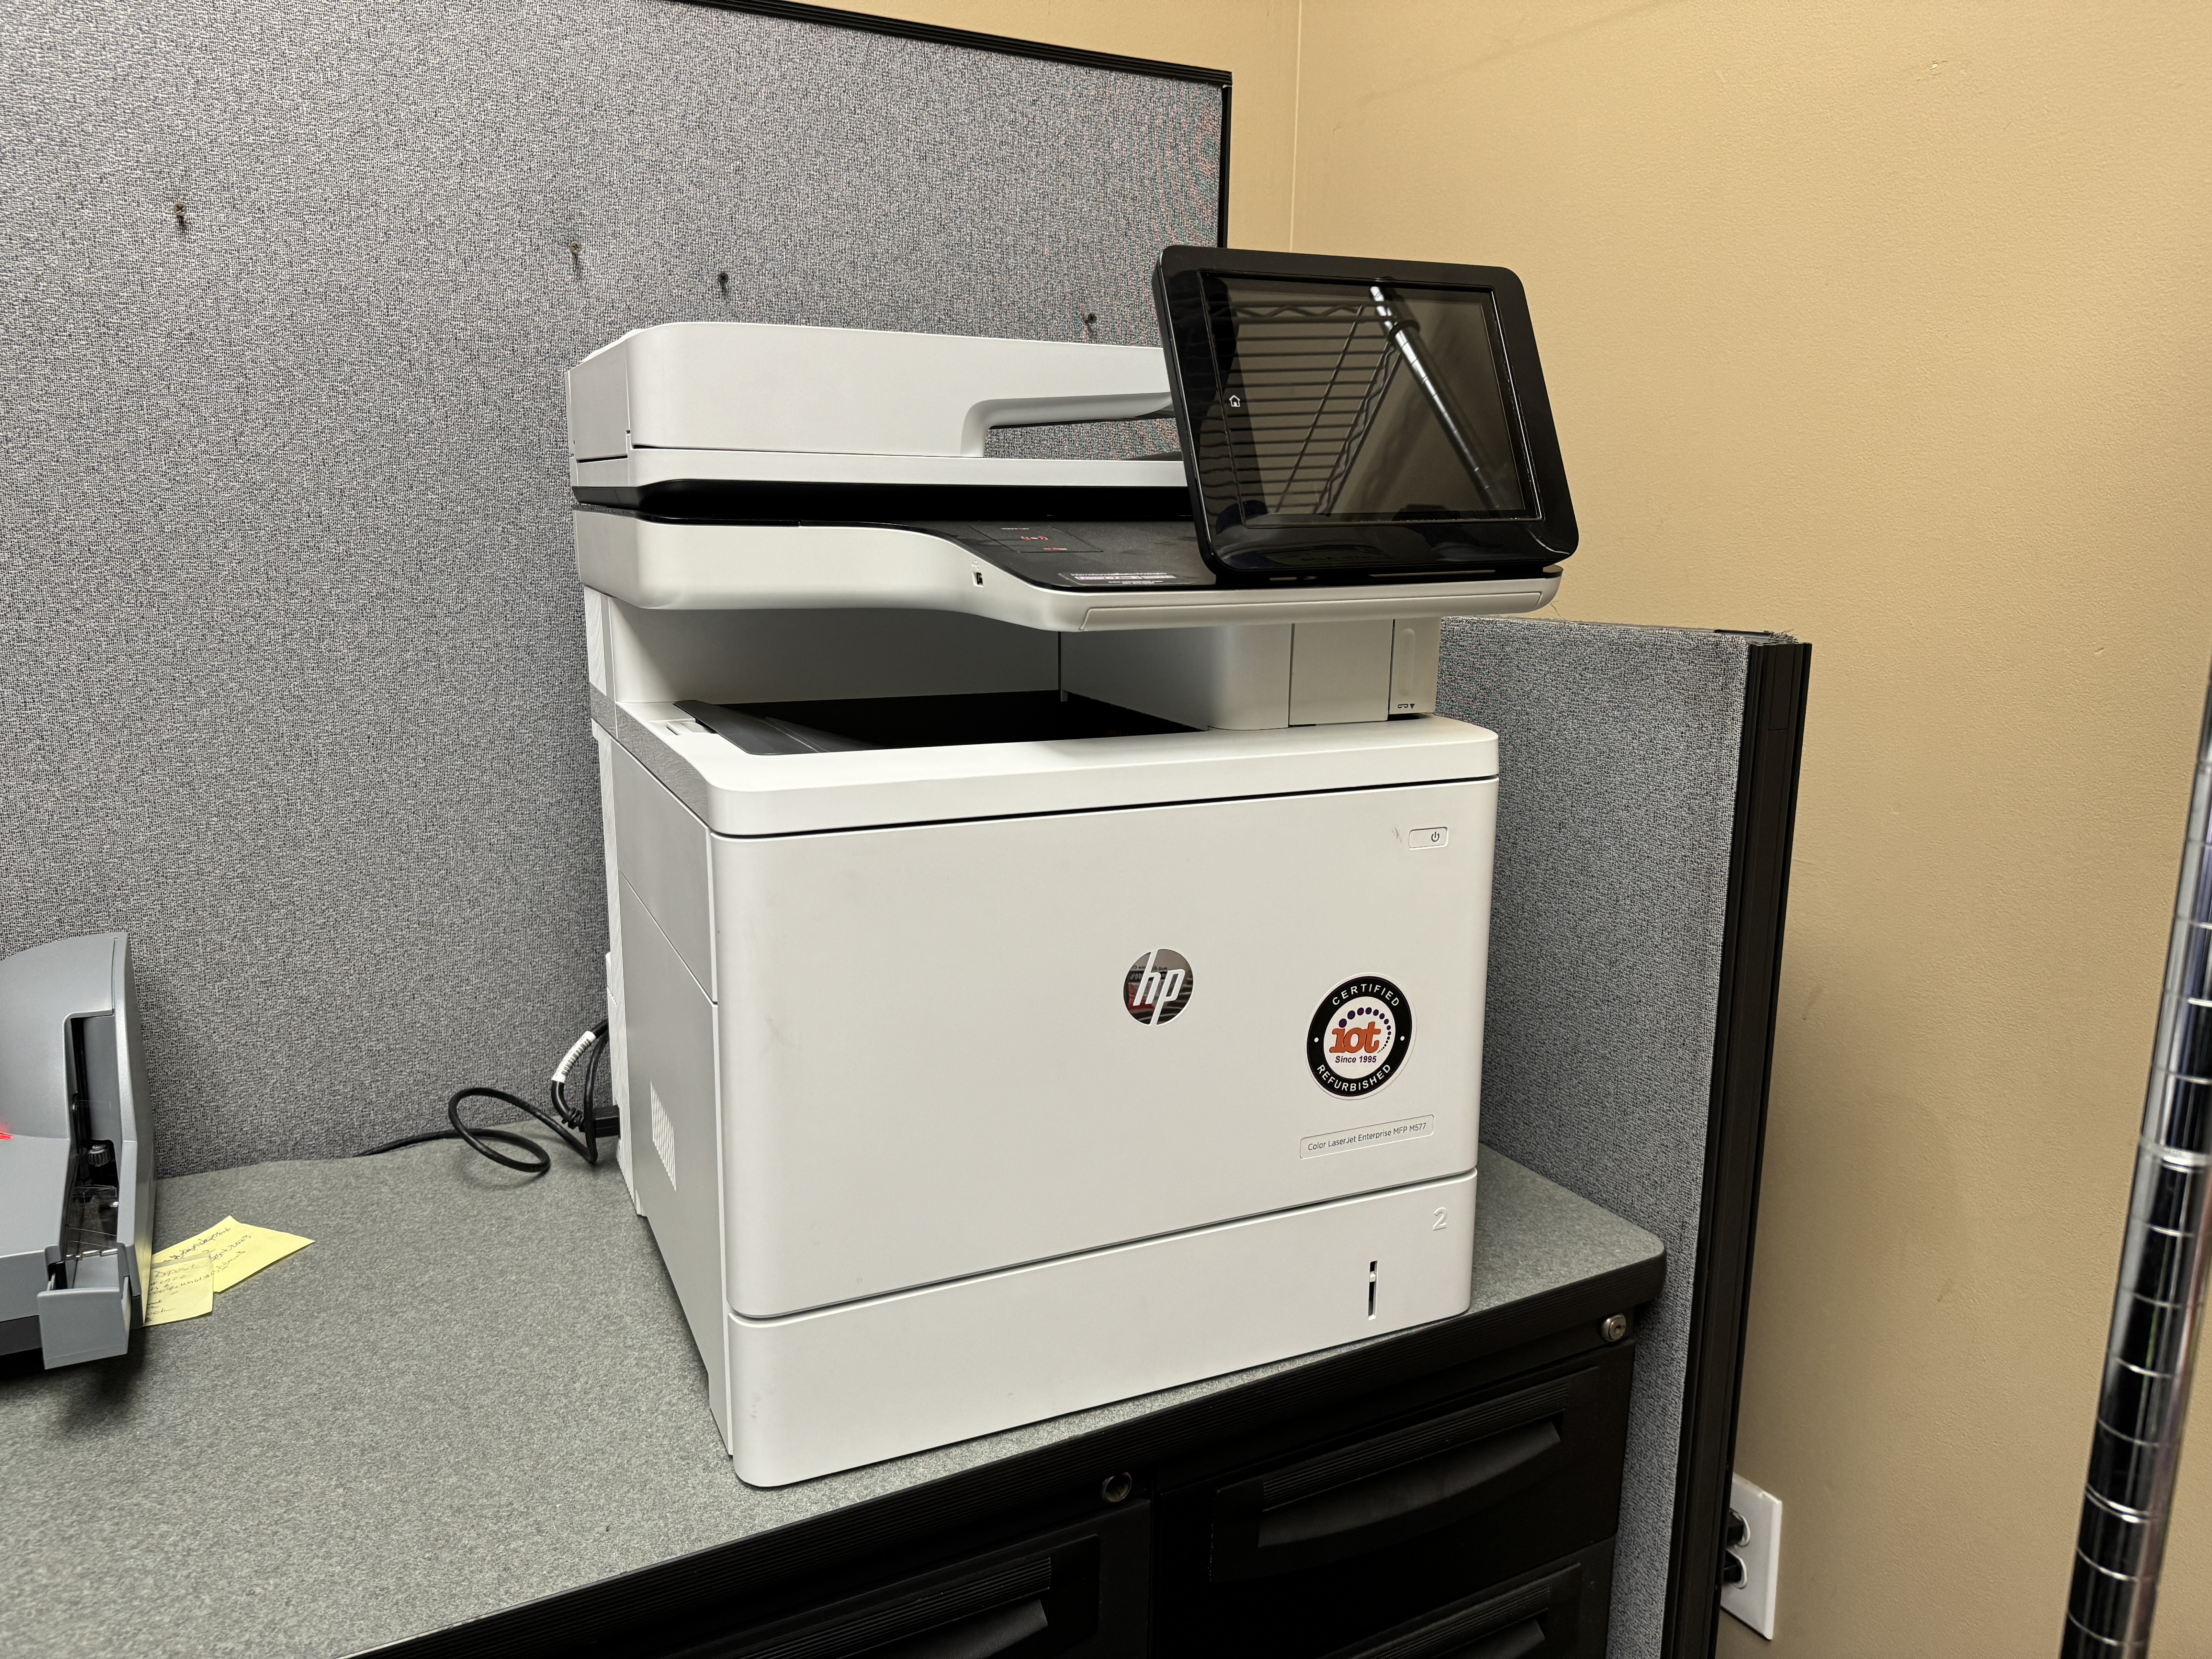 HP M577 Color Copier used in a typical IOT used copier lease. 